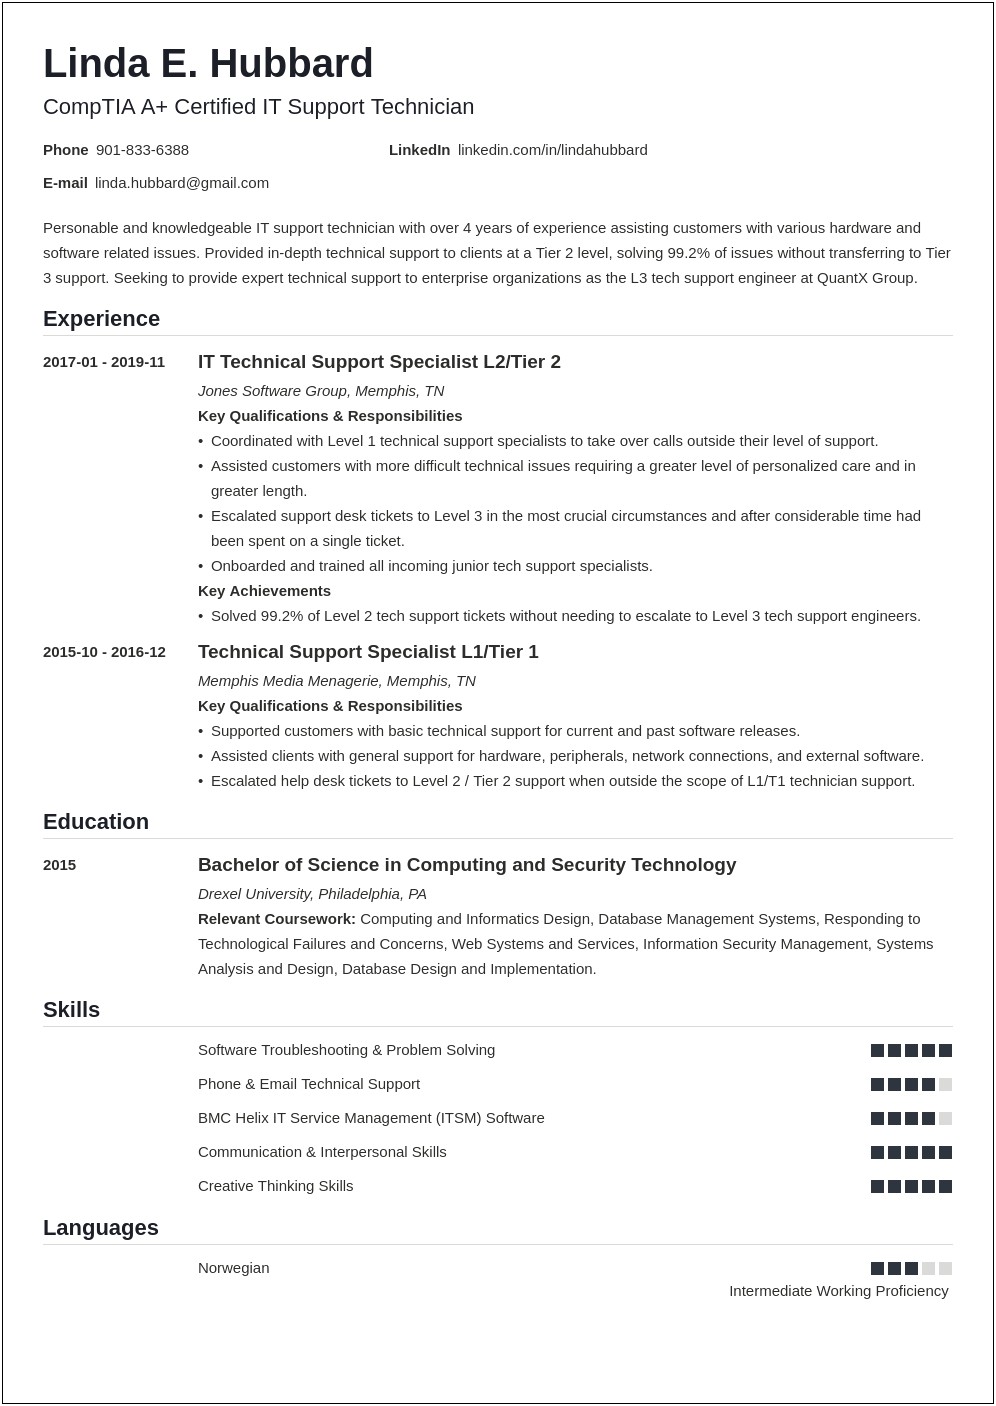 Resume Summary For Going Back Into Tech